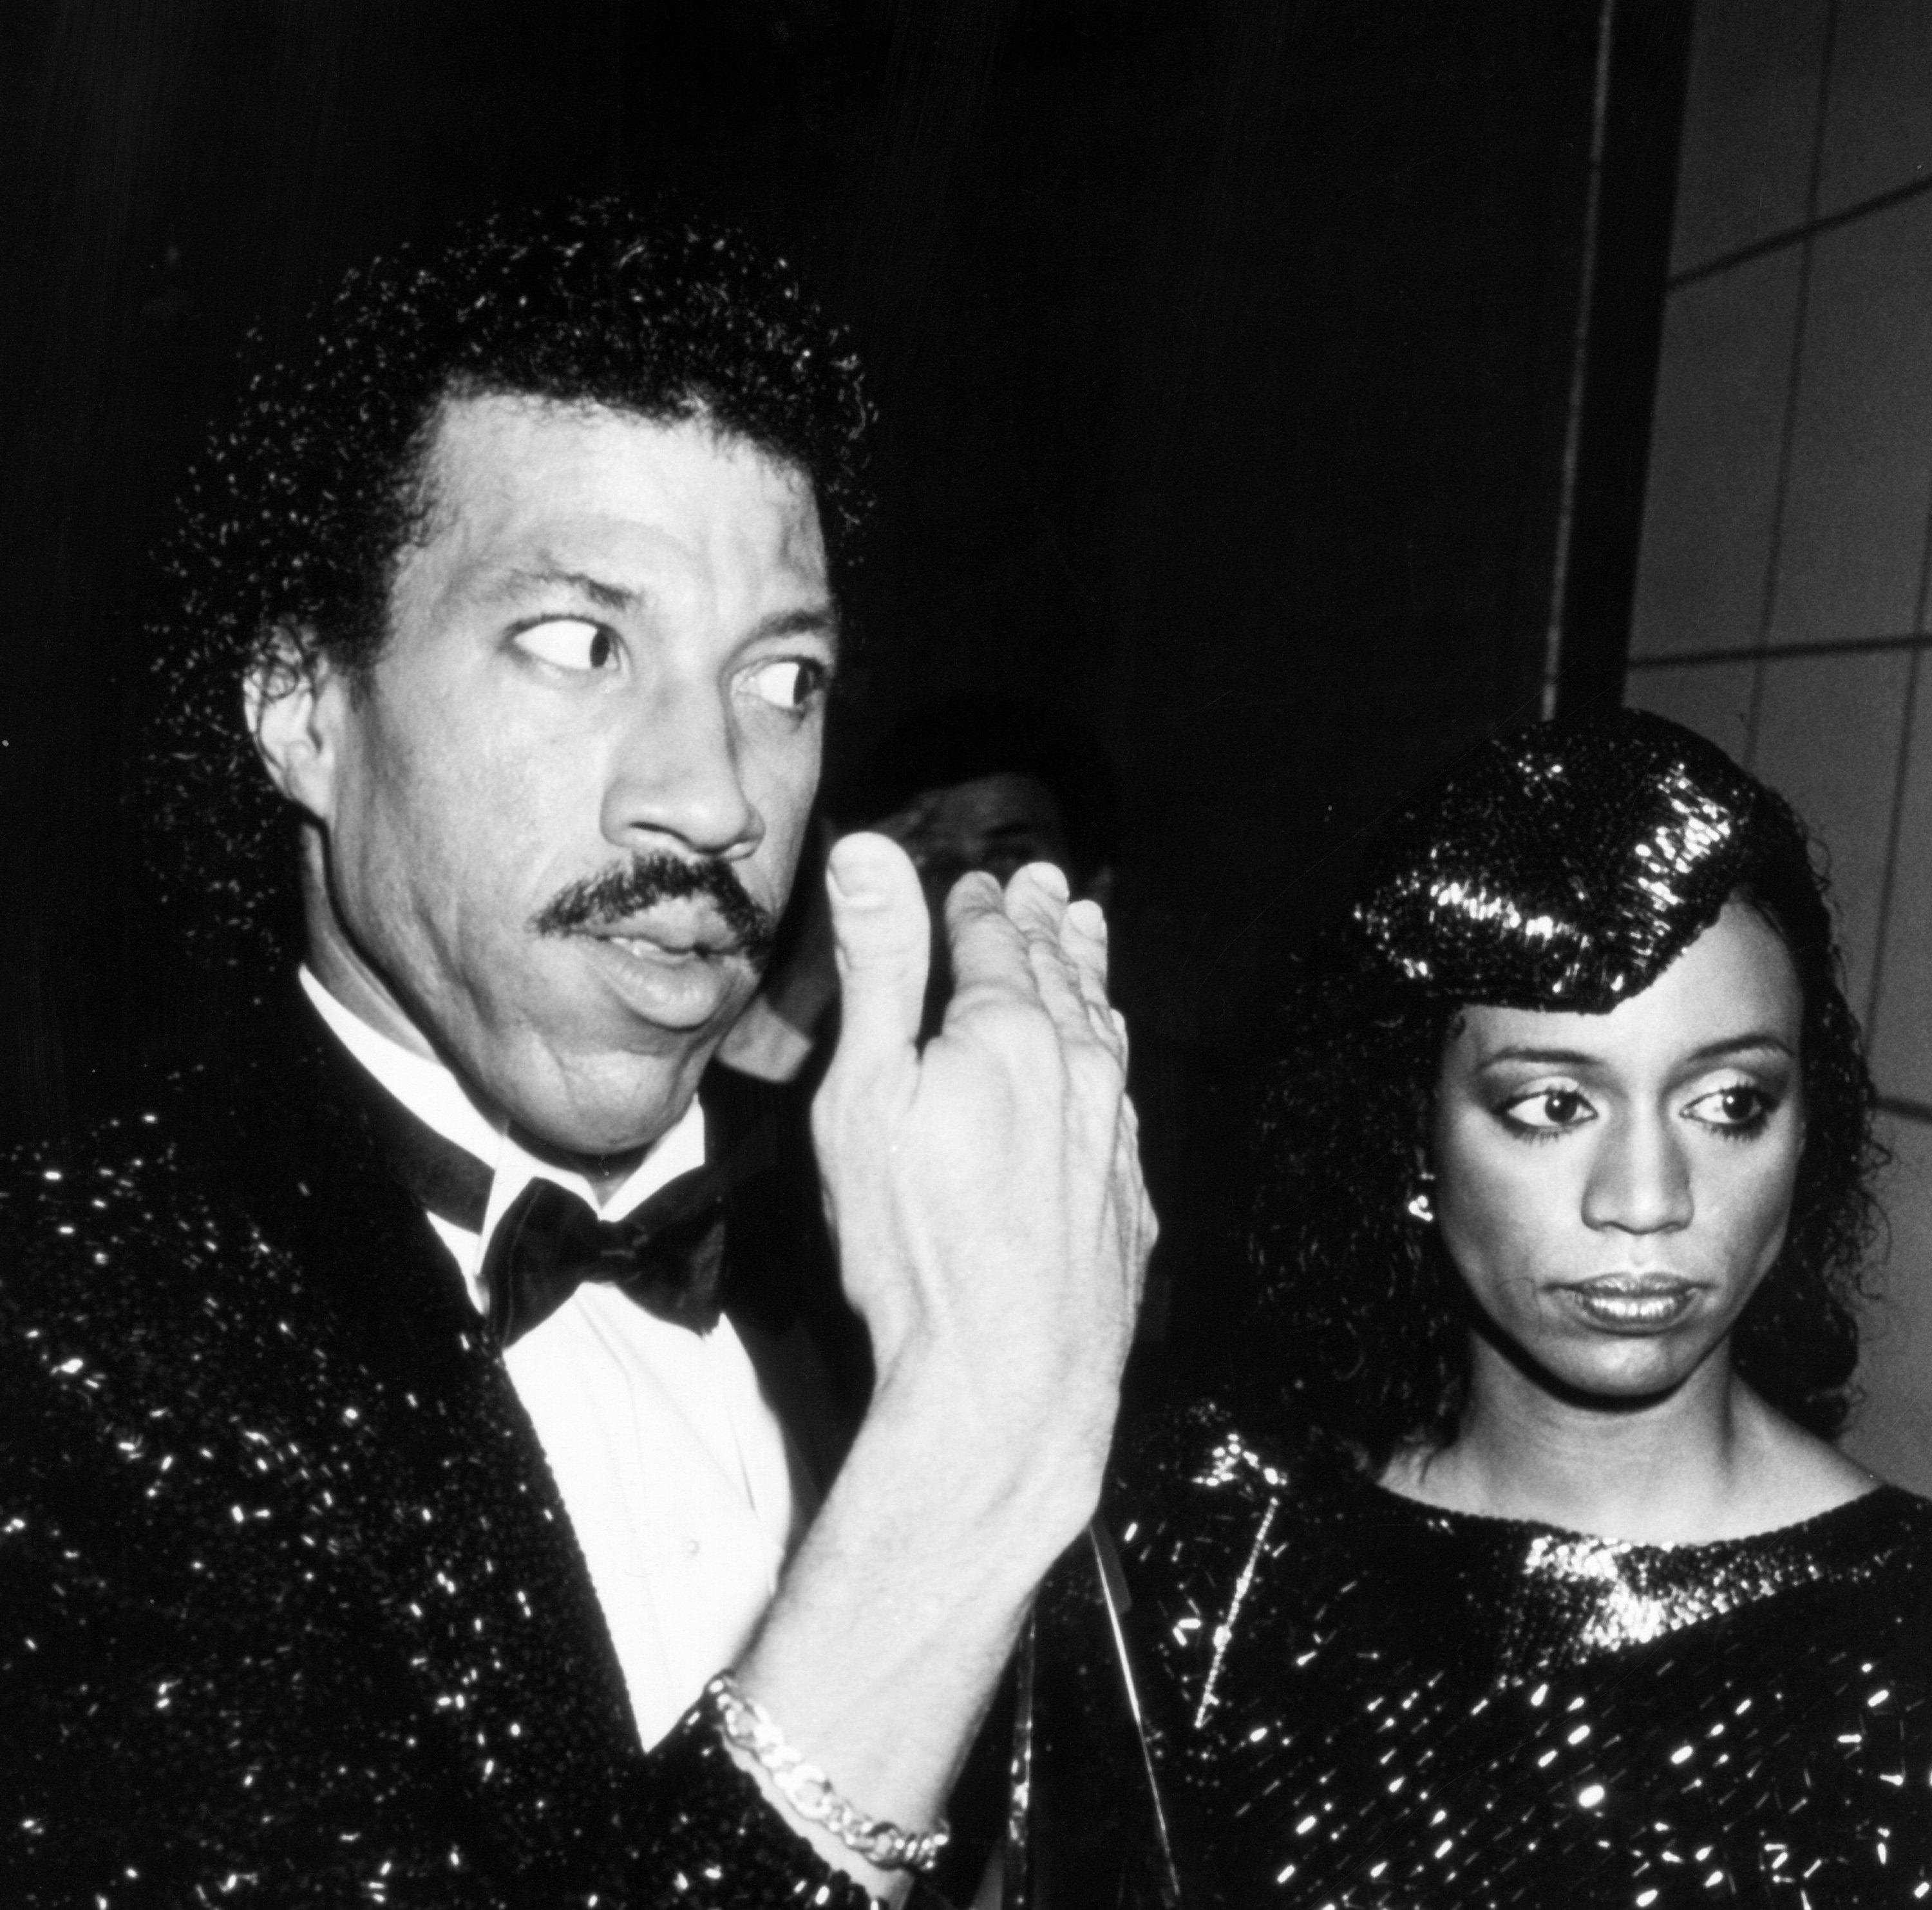 Lionel Richie and Brenda Harvey during the 11th Annual American Music Awards at the Shrine Auditorium on January 16, 1984 in Los Angeles, California. / Source: Getty Images